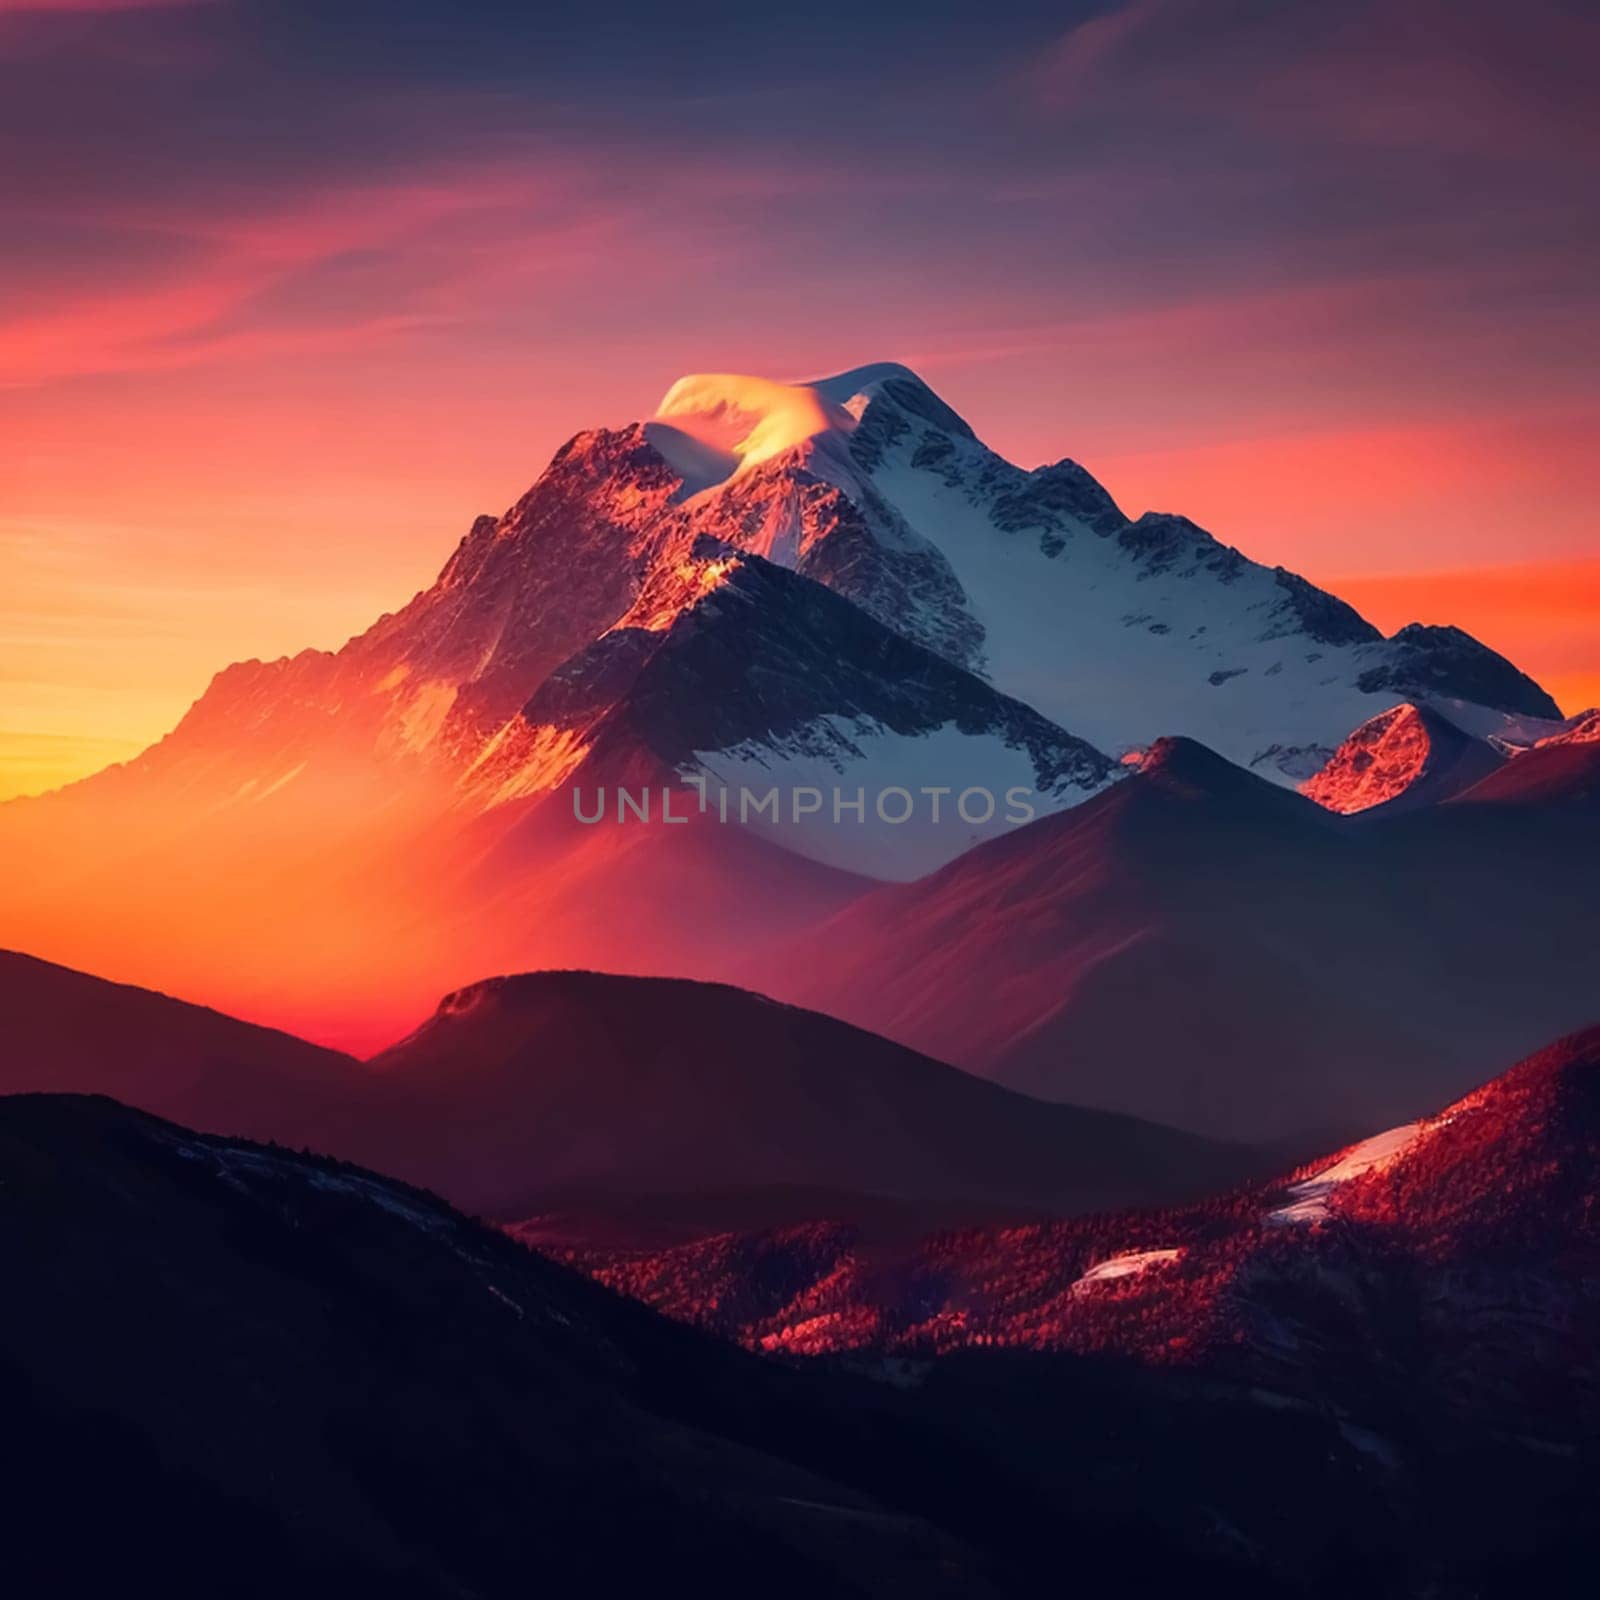 Dawn over the snow capped mountains. Snowy mountain peak at dawn. Sunrise in mountains. Mountain sunrise landscape by antoksena